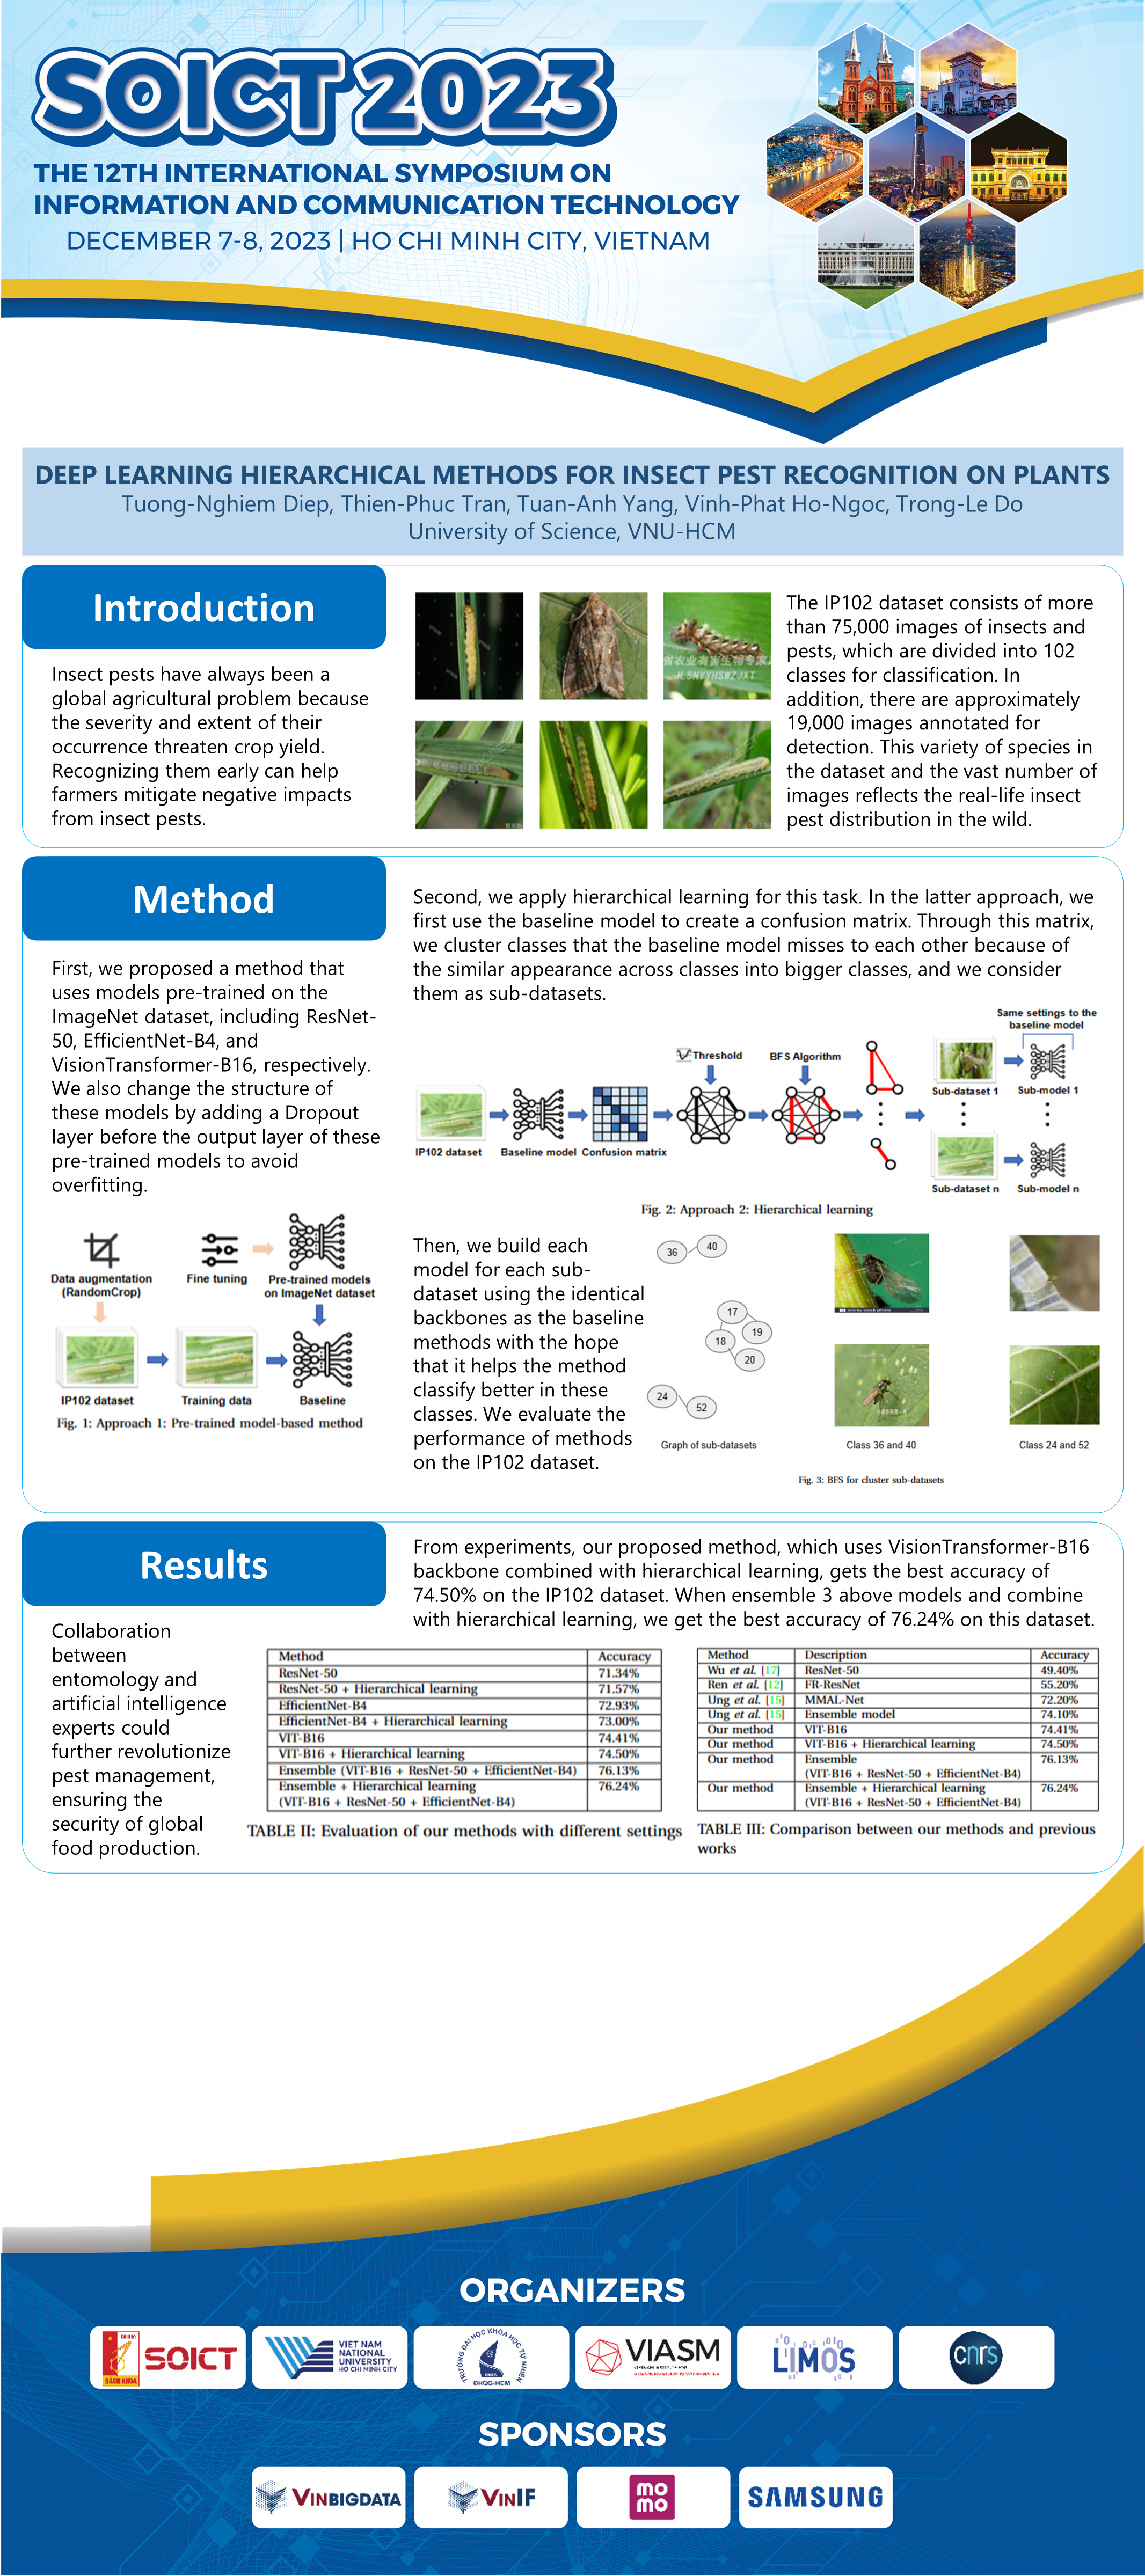 Deep Learning Hierarchical Methods for Insect Pest Recognition on Plants